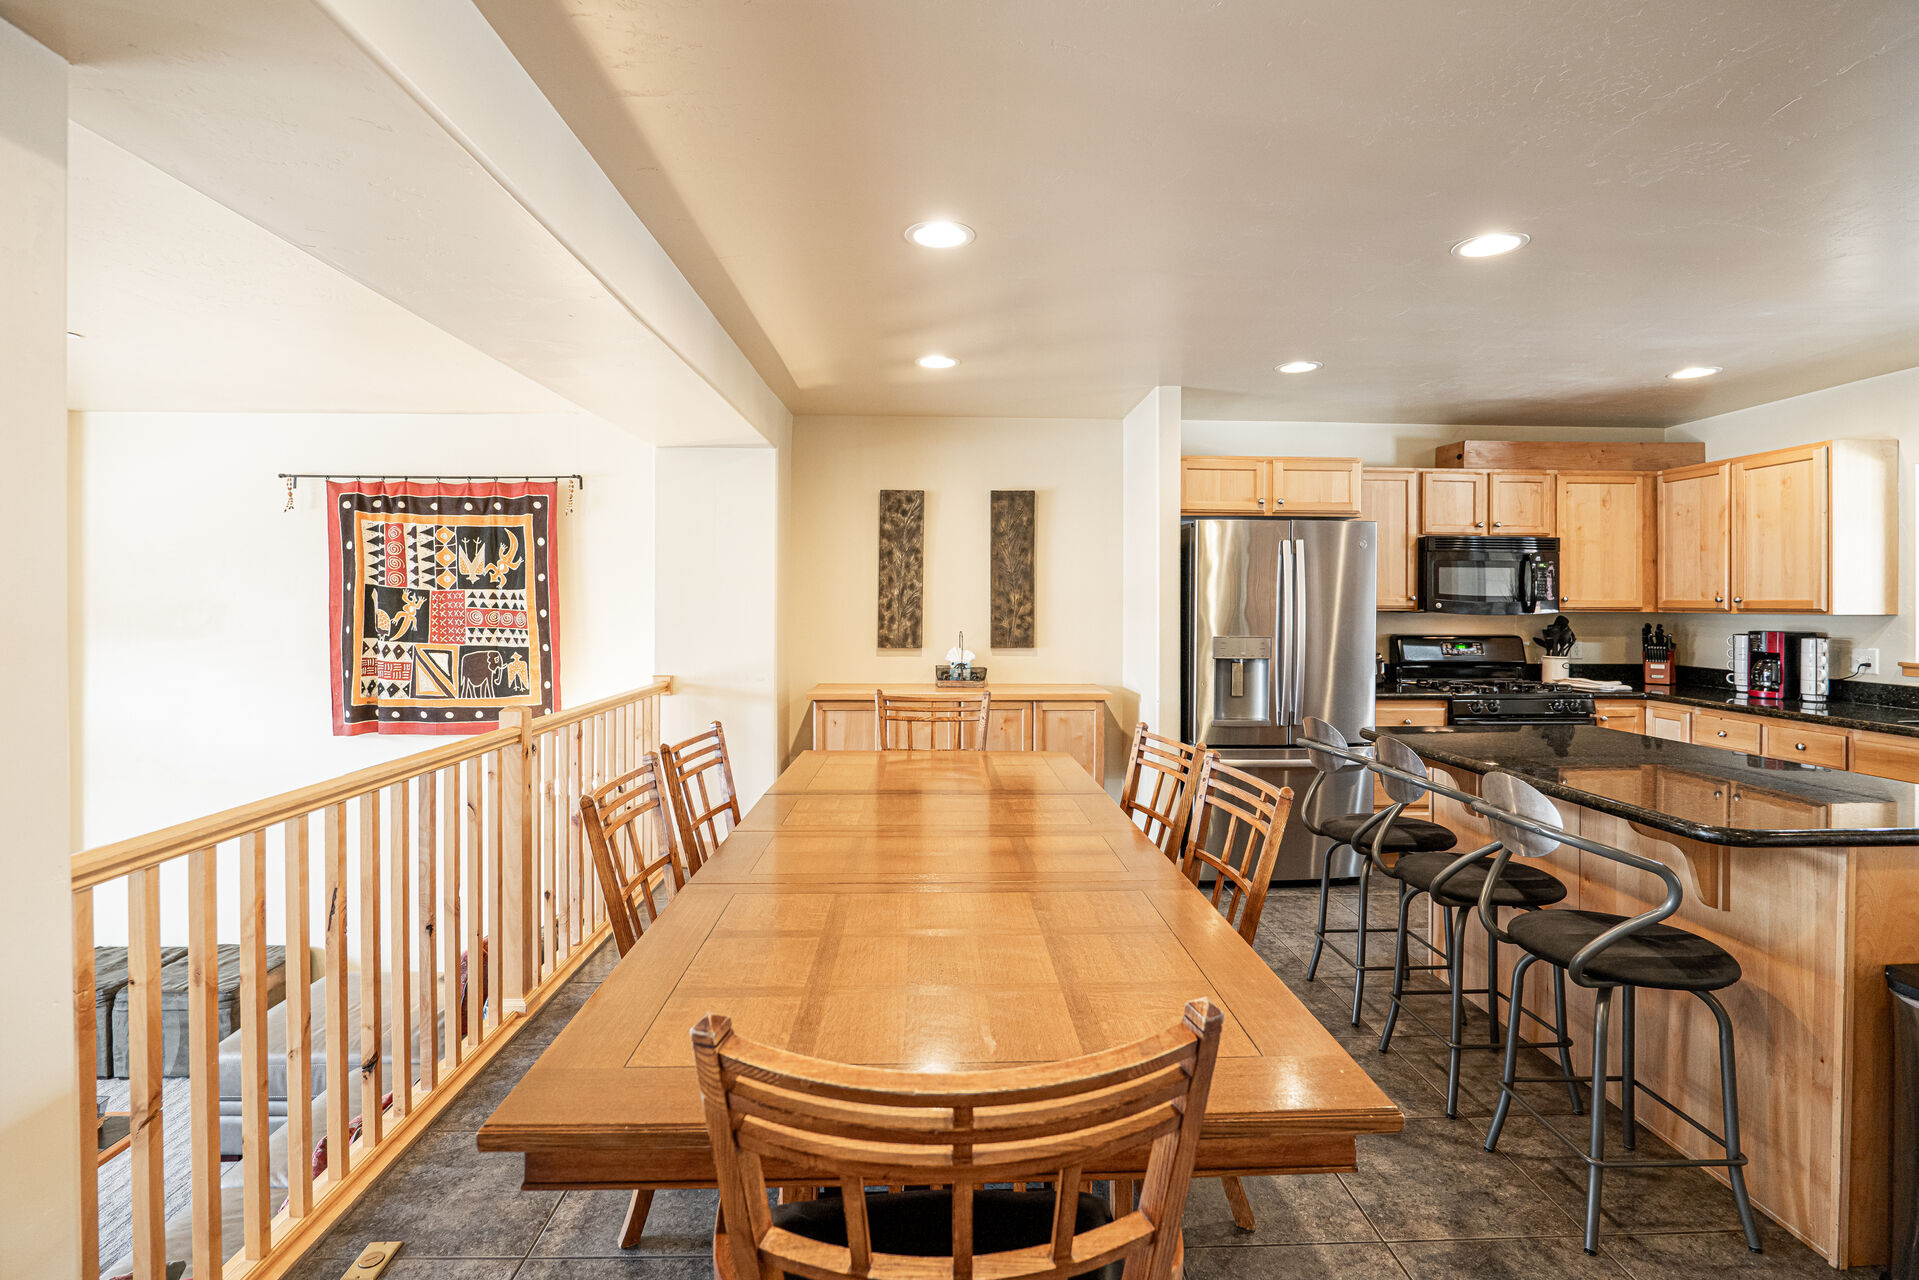 Dining Area and Kitchen Island Seating for Three